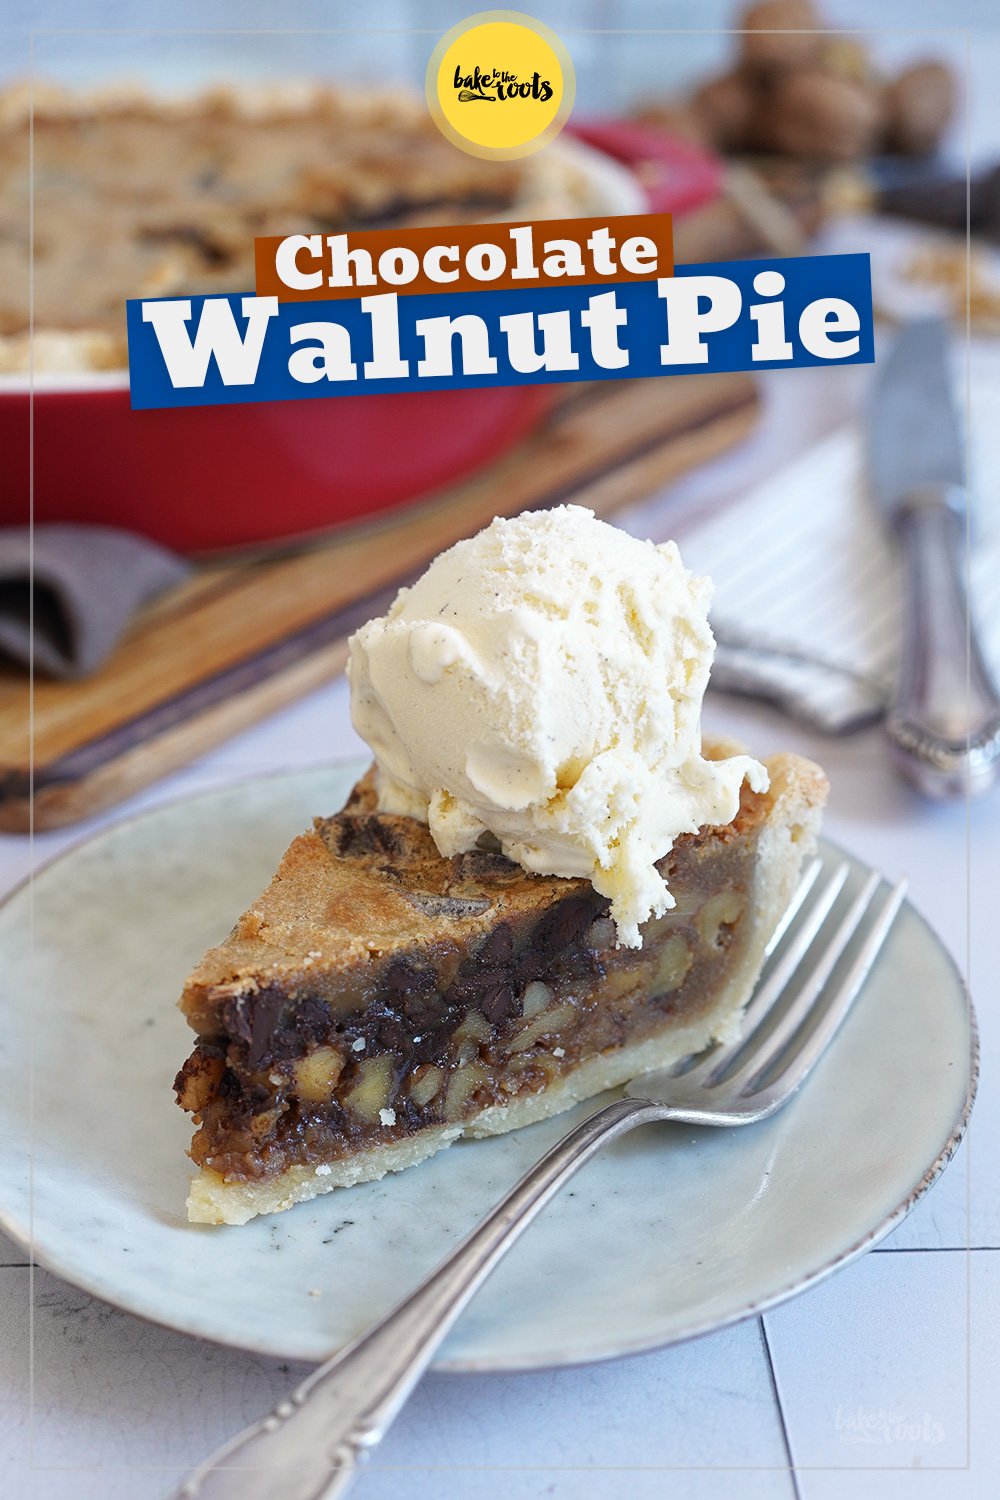 Chocolate Walnut Pie | Bake to the roots